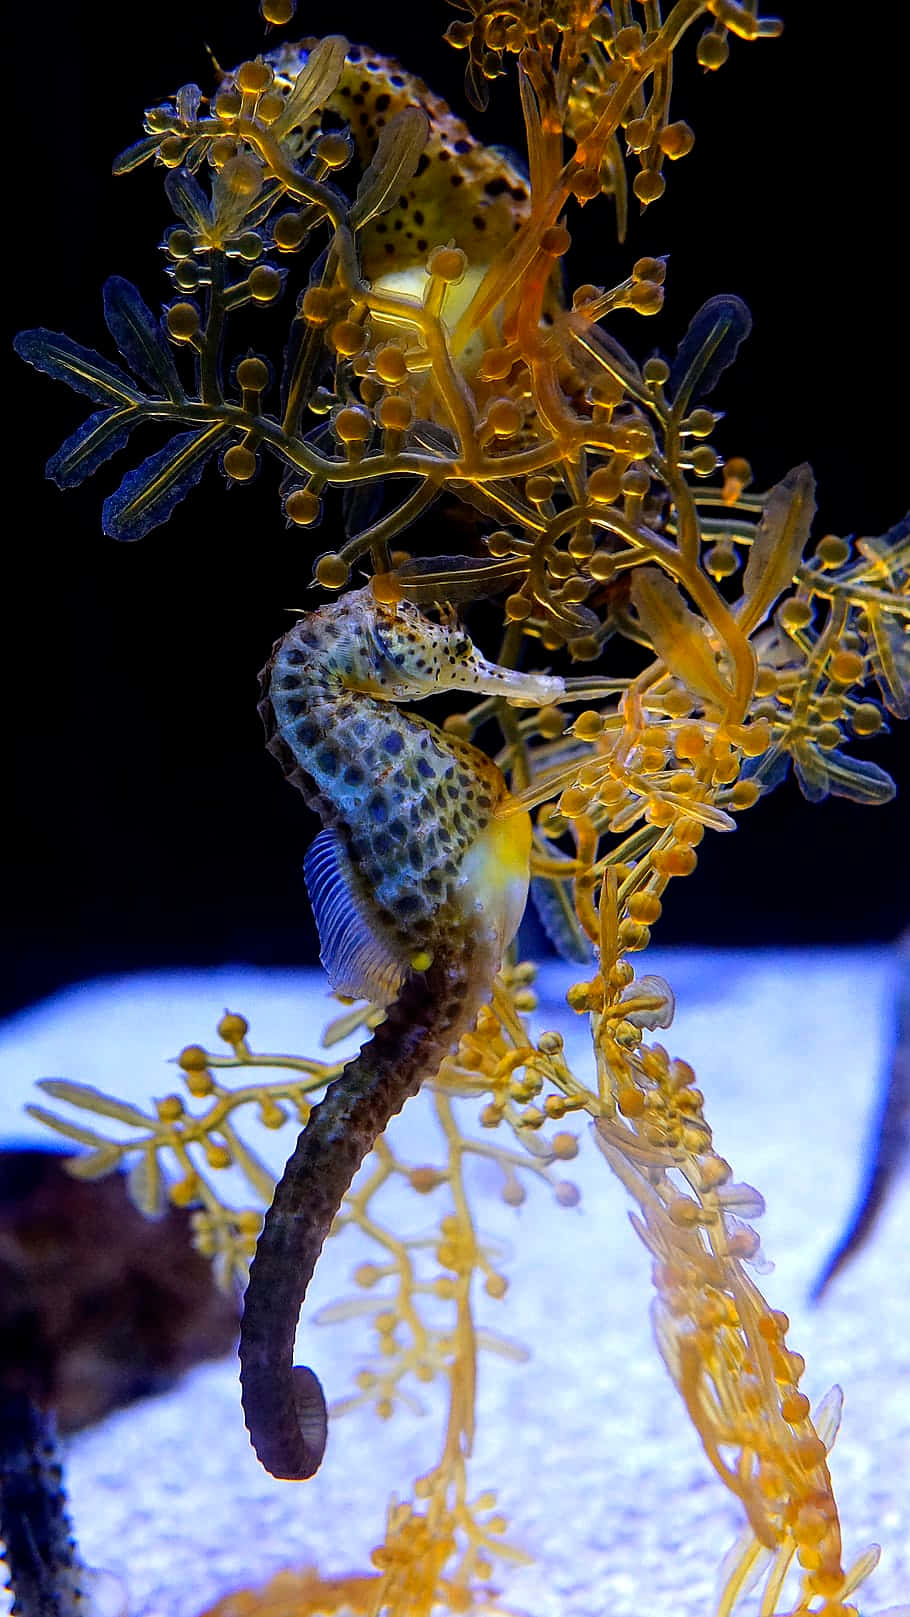 Admire the beauty and grace of the seahorse